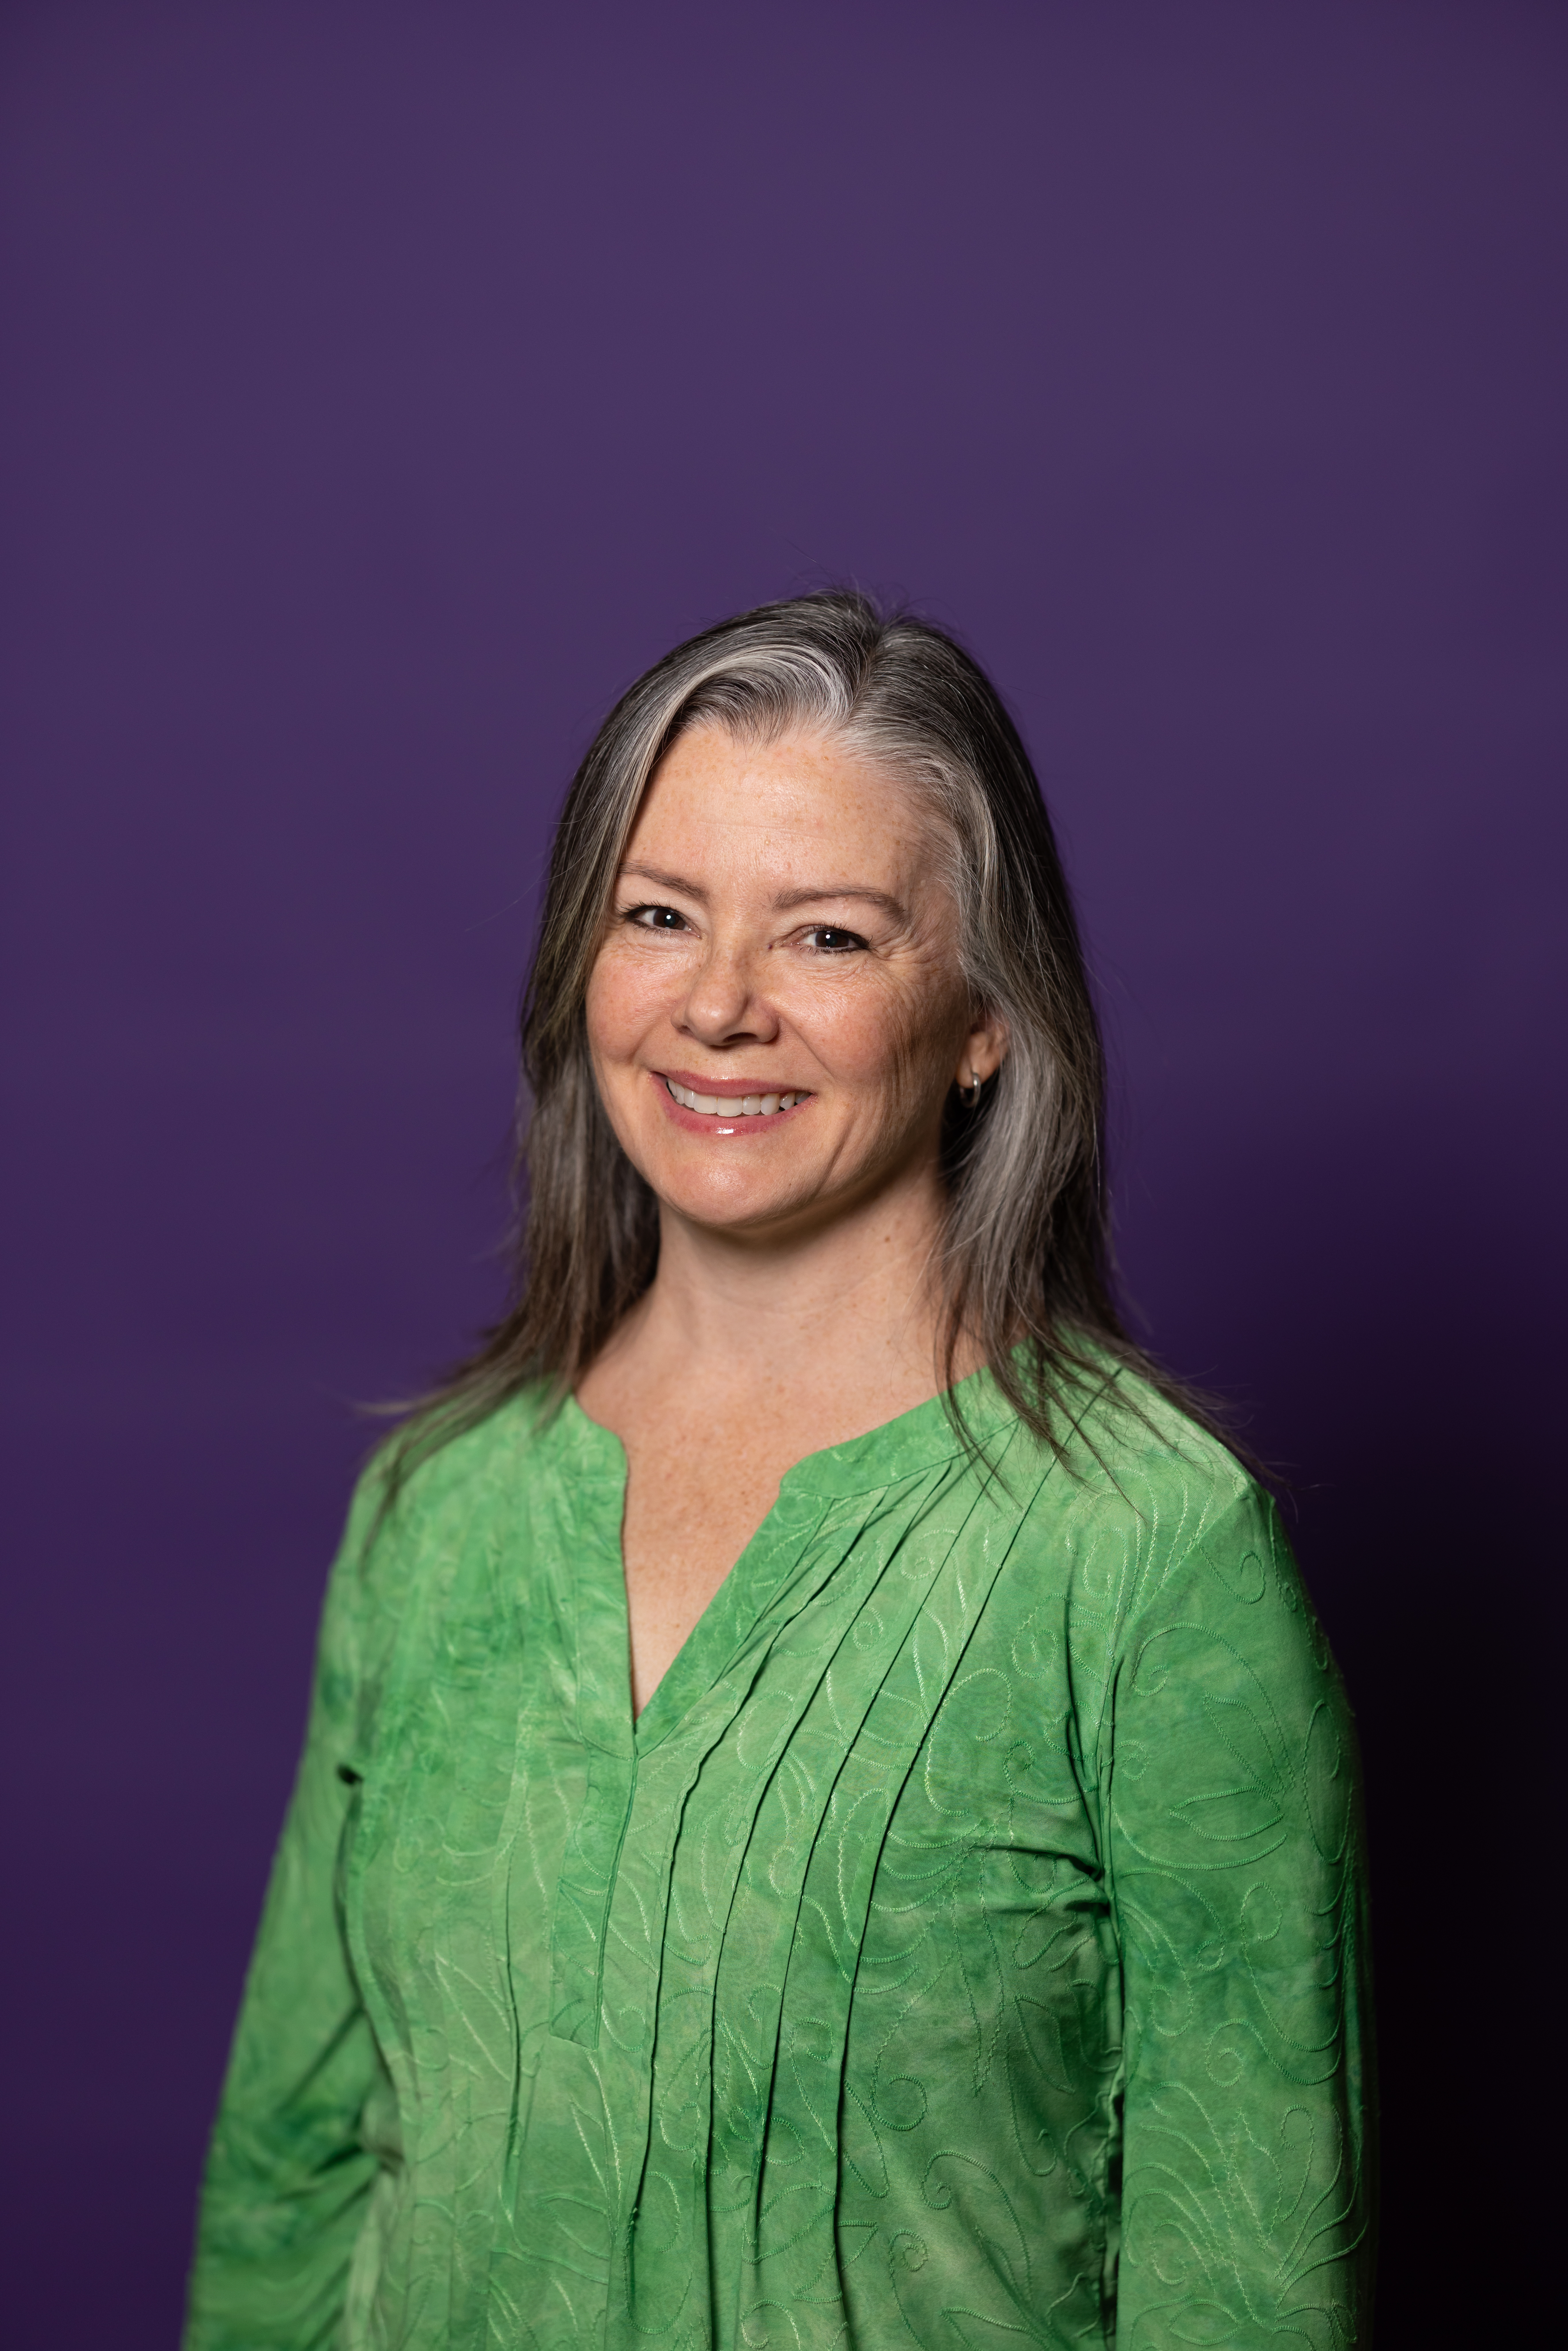 Amy smiling at the camera with a green shirt on and a purple background